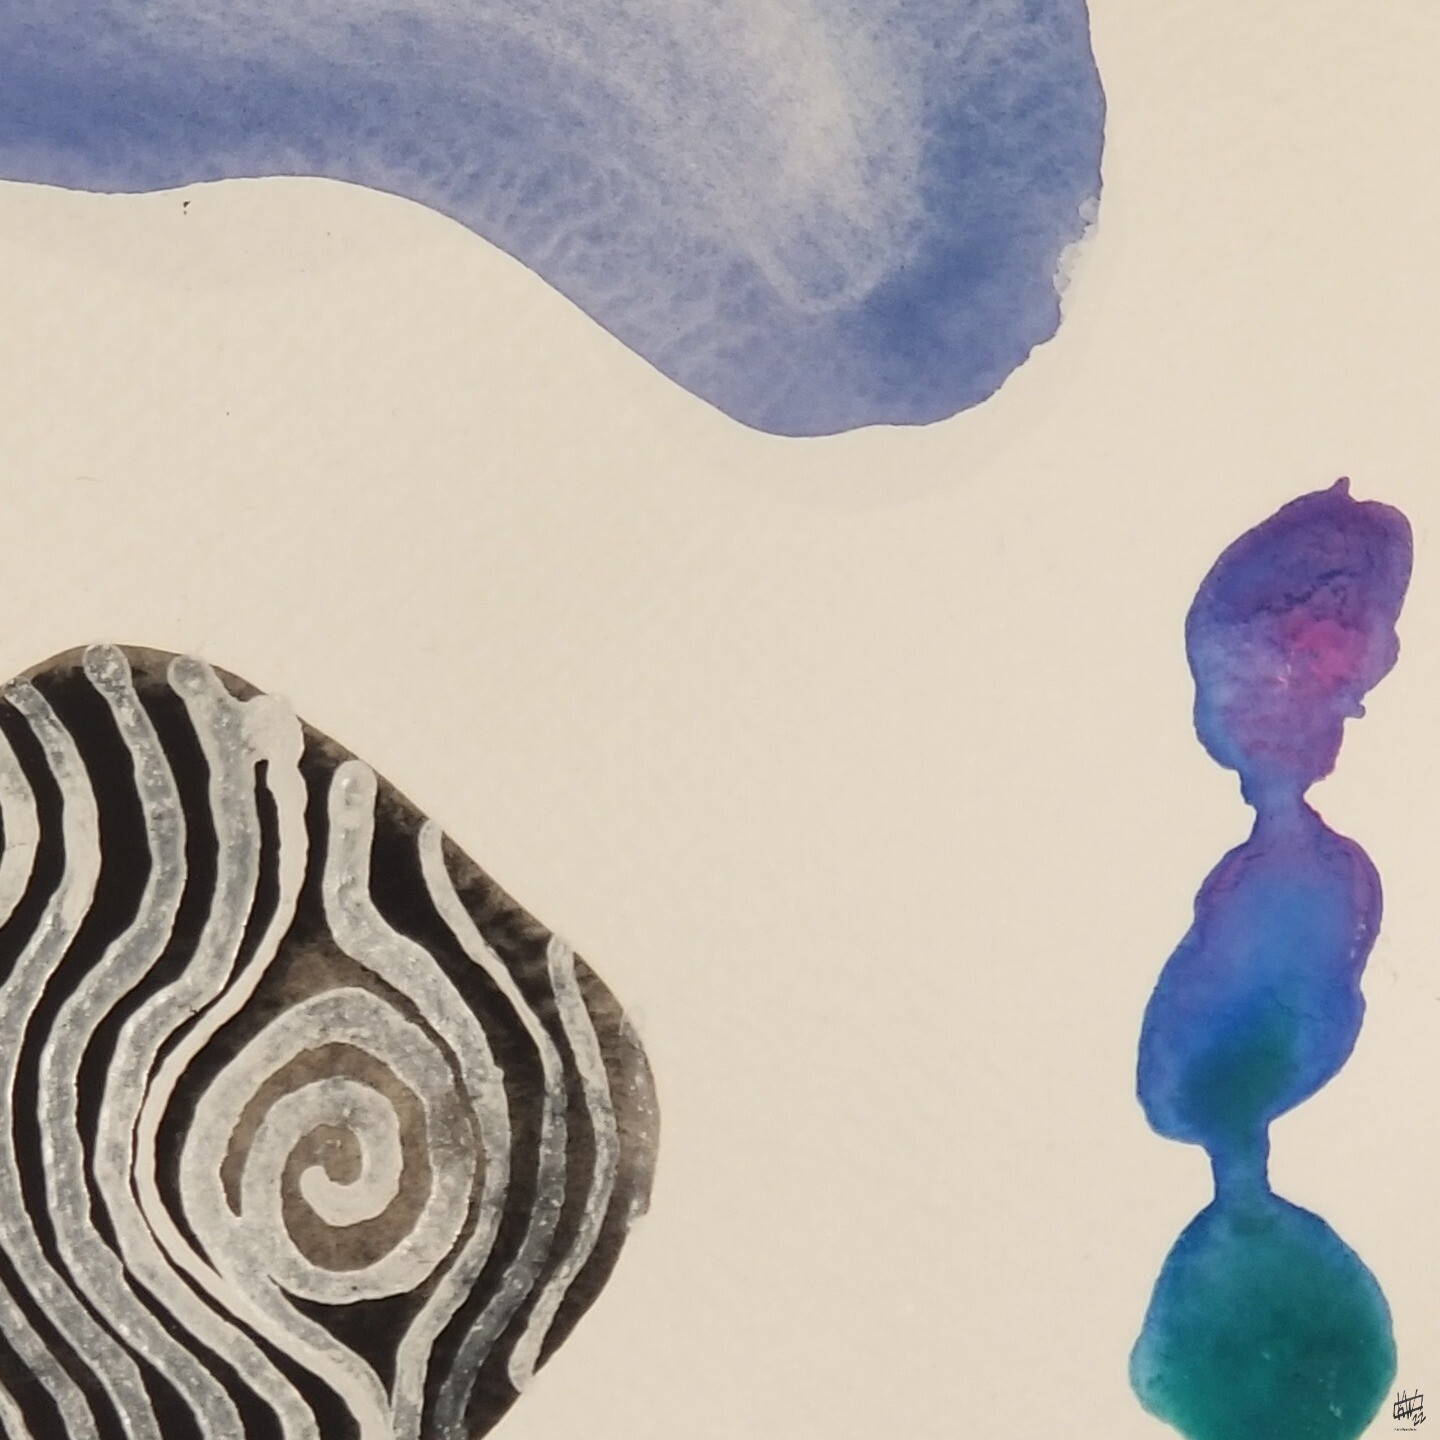 Abstract watercolor, square like an album cover, white background. From the top left, stretching most of the way across the top, is a large blue bean shape that is partly out of frame. Bottom left corner is filled with a black rounded triangle with irregular white stripes, also partly out of frame. On the right hand side is a blue-purple-green shape that looks like a vaguely humanoid silhouette with no arms & a circle of colors here you expect the legs to be.